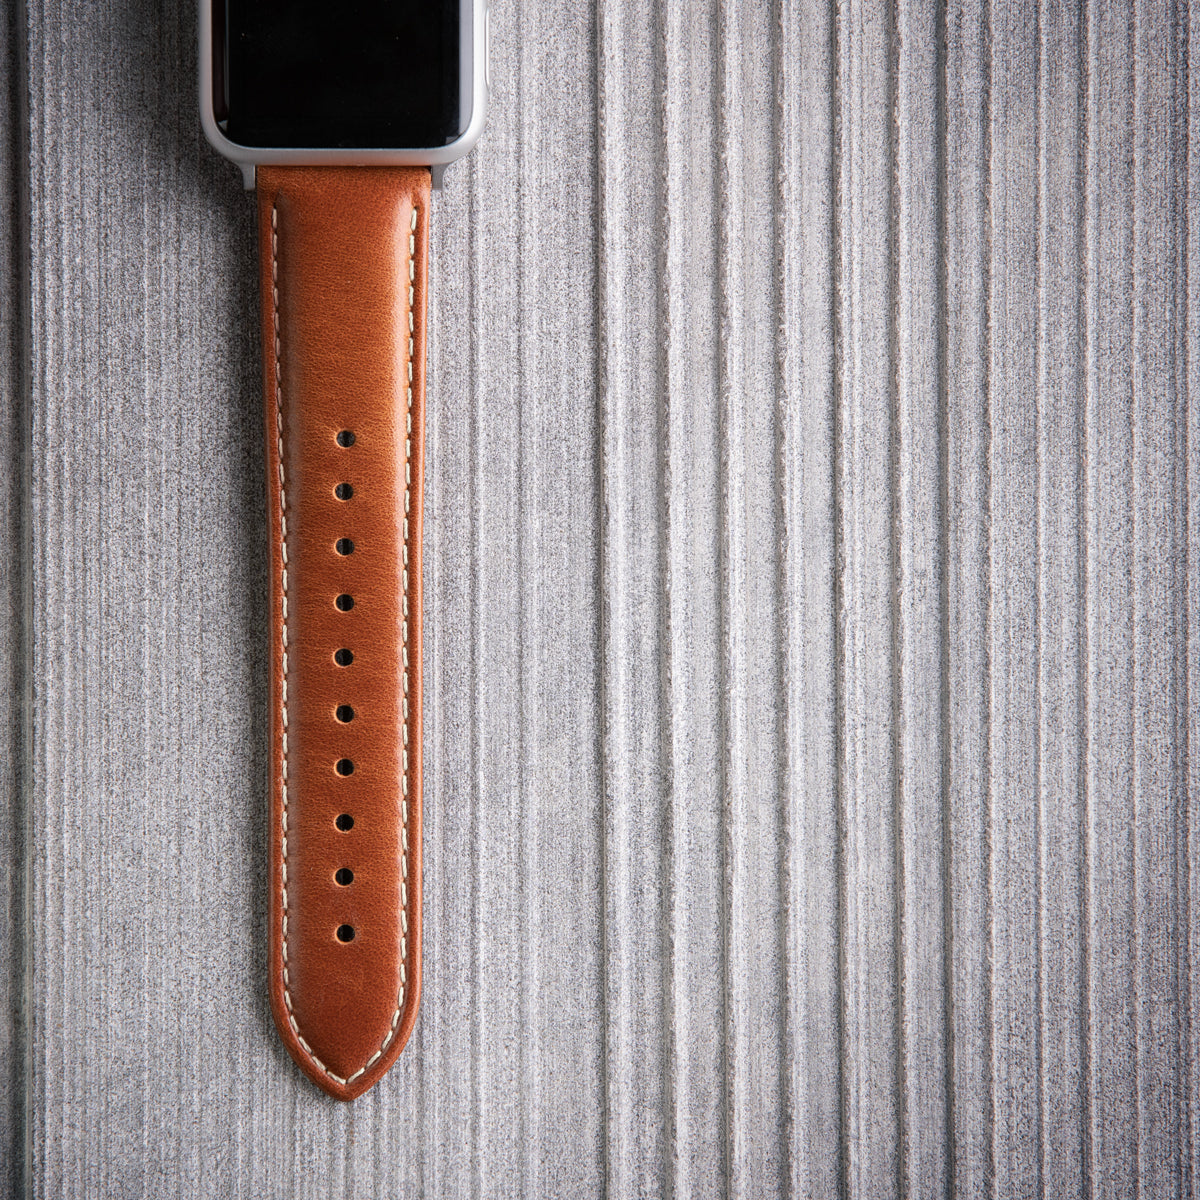 Archer Watch Straps - Our new quick release leather straps are